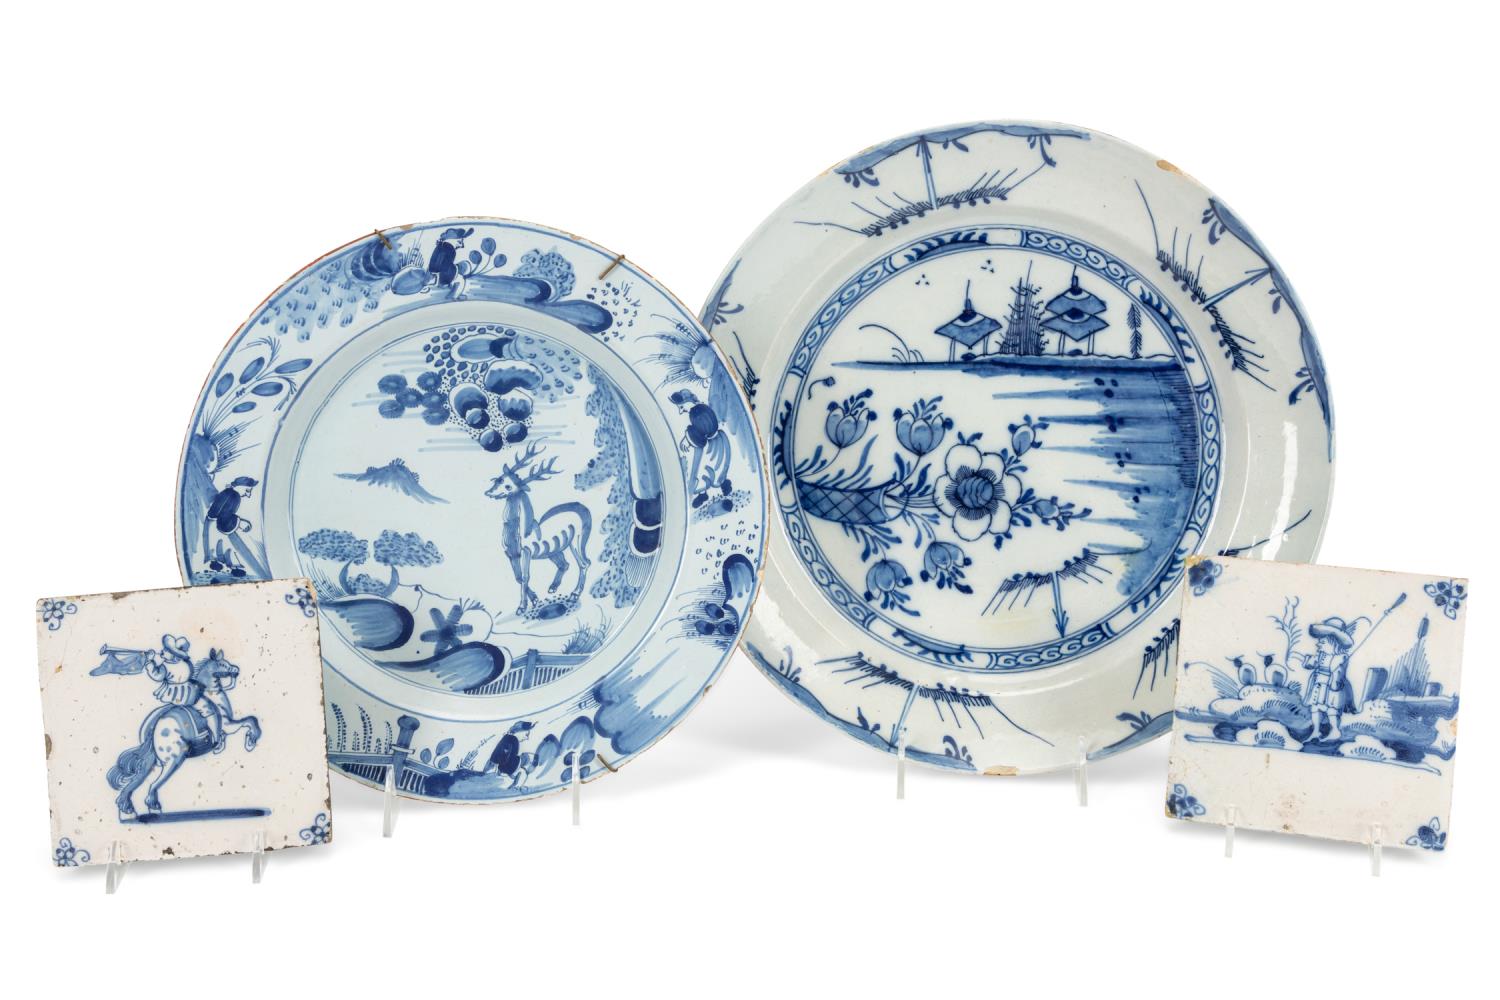 FOUR PIECES OF BLUE WHITE DELFTWARE  2bfd1e